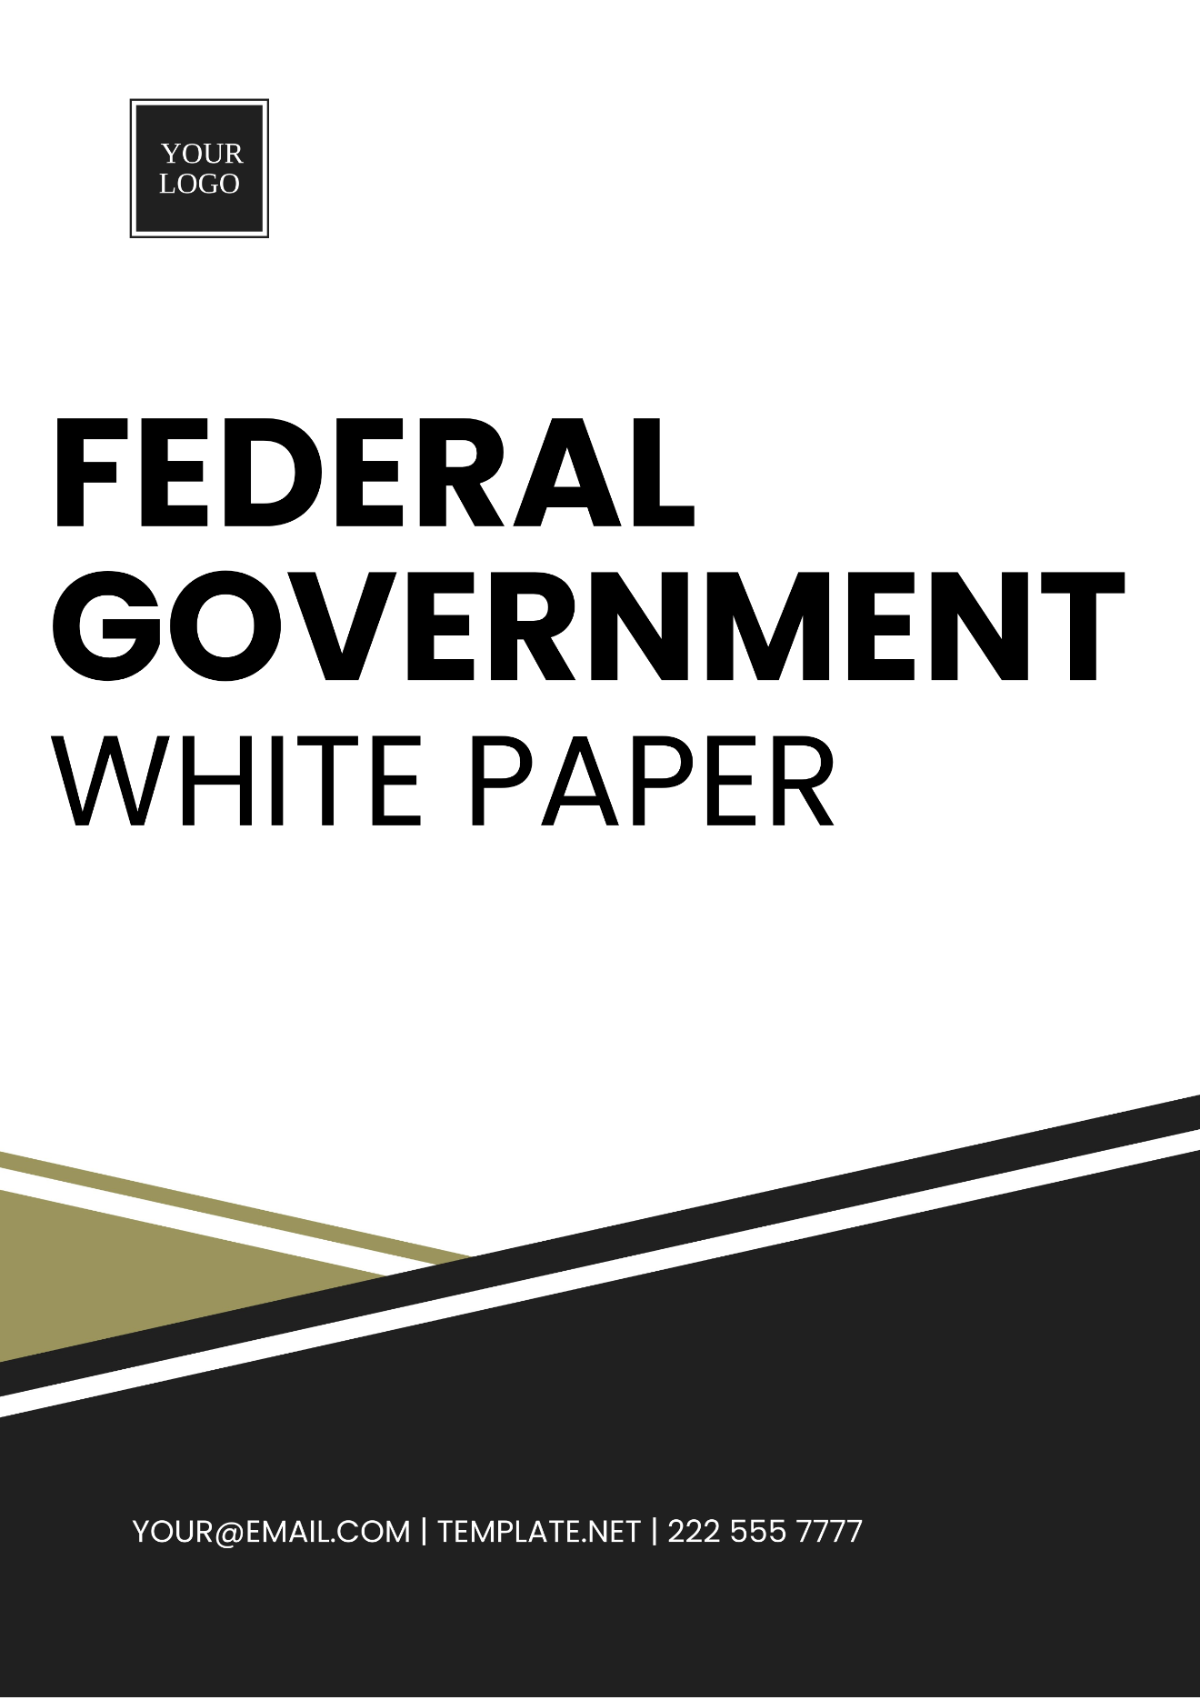 Federal Government White Paper Template